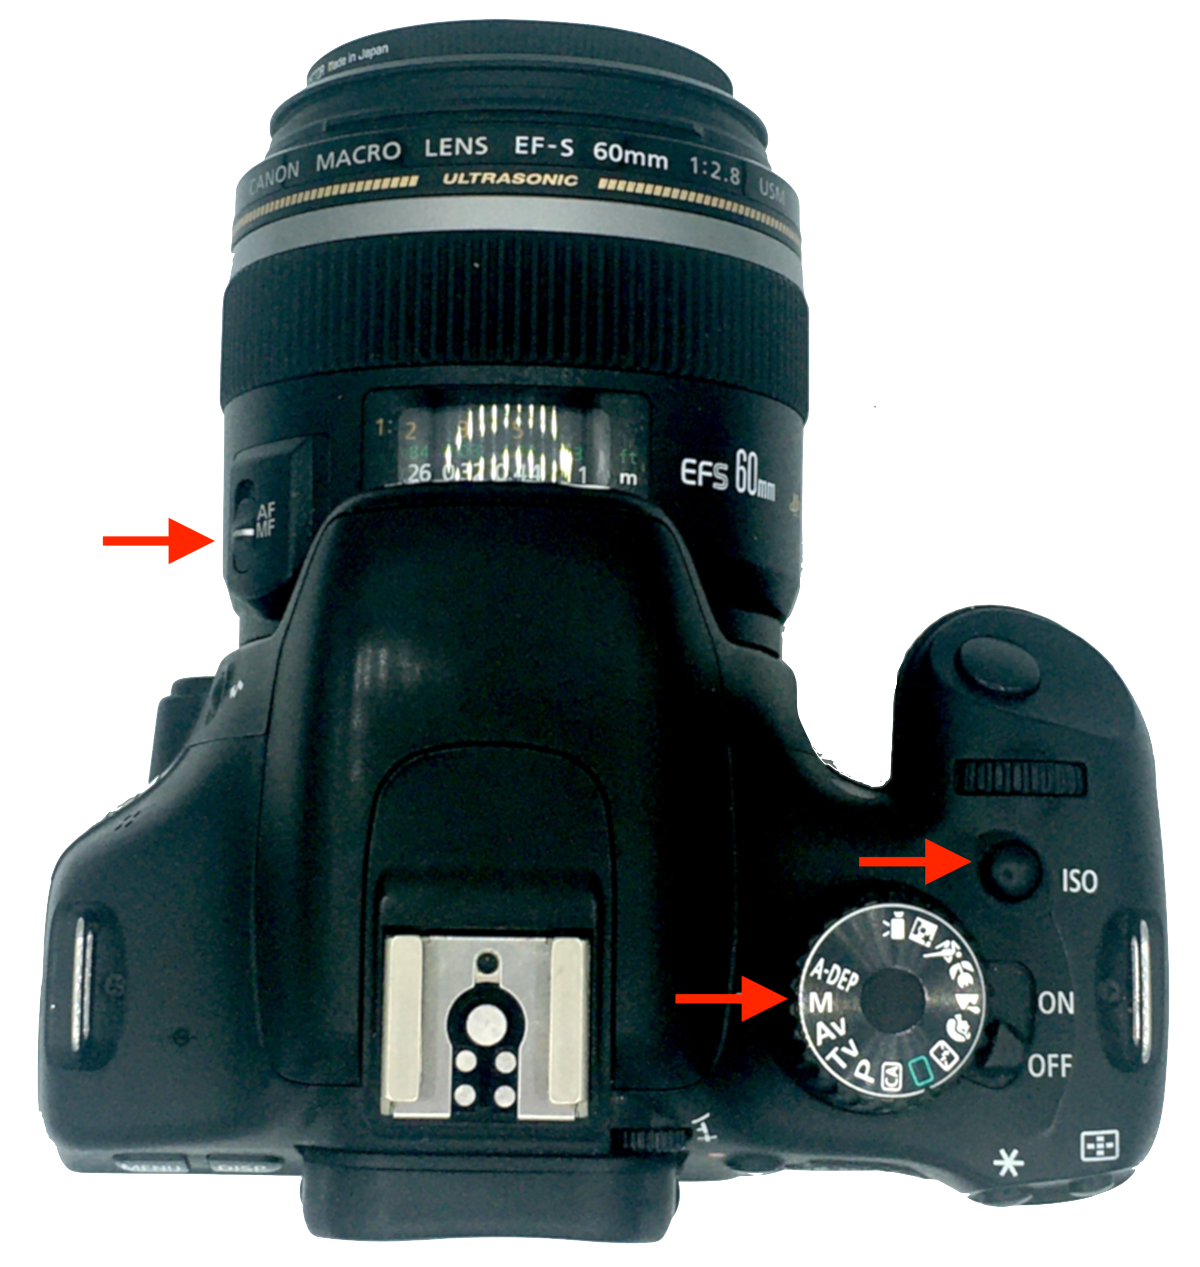 Camera (Canon T2i/550D) and lens (60mm f/2.8 Macro lens) used to take RAW photos. The red arrows (from top to bottom) depict the button to get manual focus, the ISO button and the Manual Exposure mode dial.